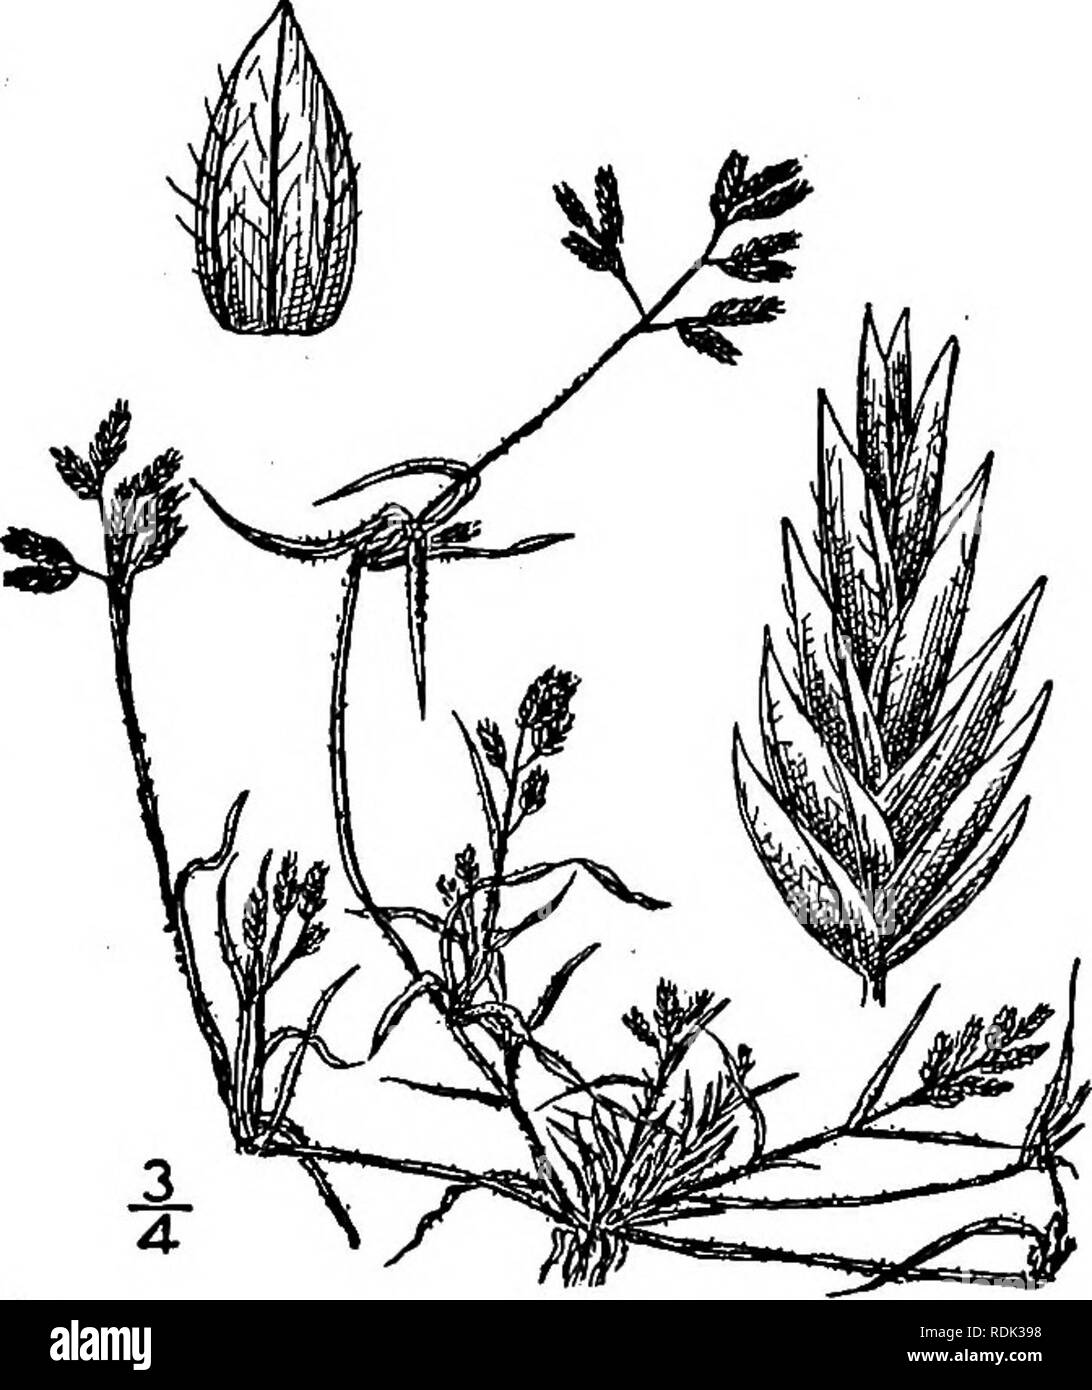 . An illustrated flora of the northern United States, Canada and the British possessions, from Newfoundland to the parallel of the southern boundary of Virginia, and from the Atlantic Ocean westward to the 102d meridian. Botany; Botany. 13. Eragrostis hypnoides (Lam.) B.S.P. Smooth Creeping Love- grass. Fig. 584. Poa hypnoides Lam. Tabl. Encycl. 1: 185. 1791. Eragrostis reptans Nees, Agrost. Bras. 514. 1829. Eragrostis hypoides B.S.P. Prel. Cat. N. Y. 69. 1888. Ne-eragrostis hypnoides Bush, Trans. St. Louis Acad. 13: 180. 1903. Culms i'-i8' long, extensively creep- ing, branched, smooth and gl Stock Photo